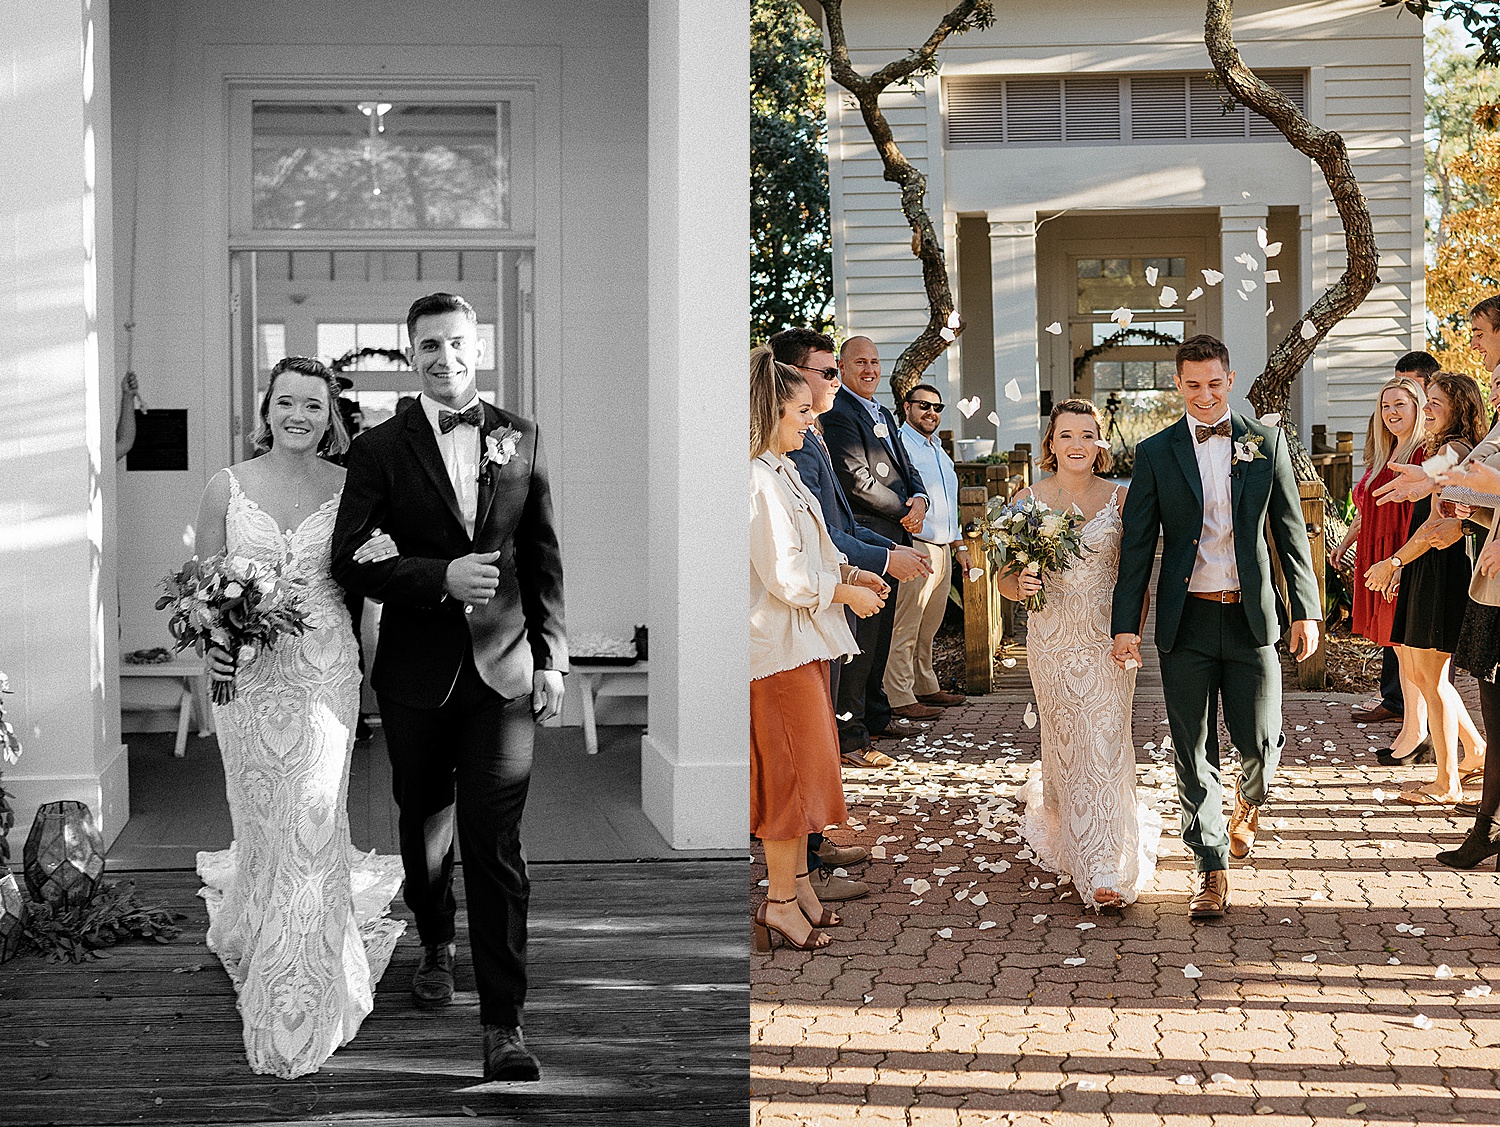 Wedding guests throw flower petals out bride and groom outside of wedding venue